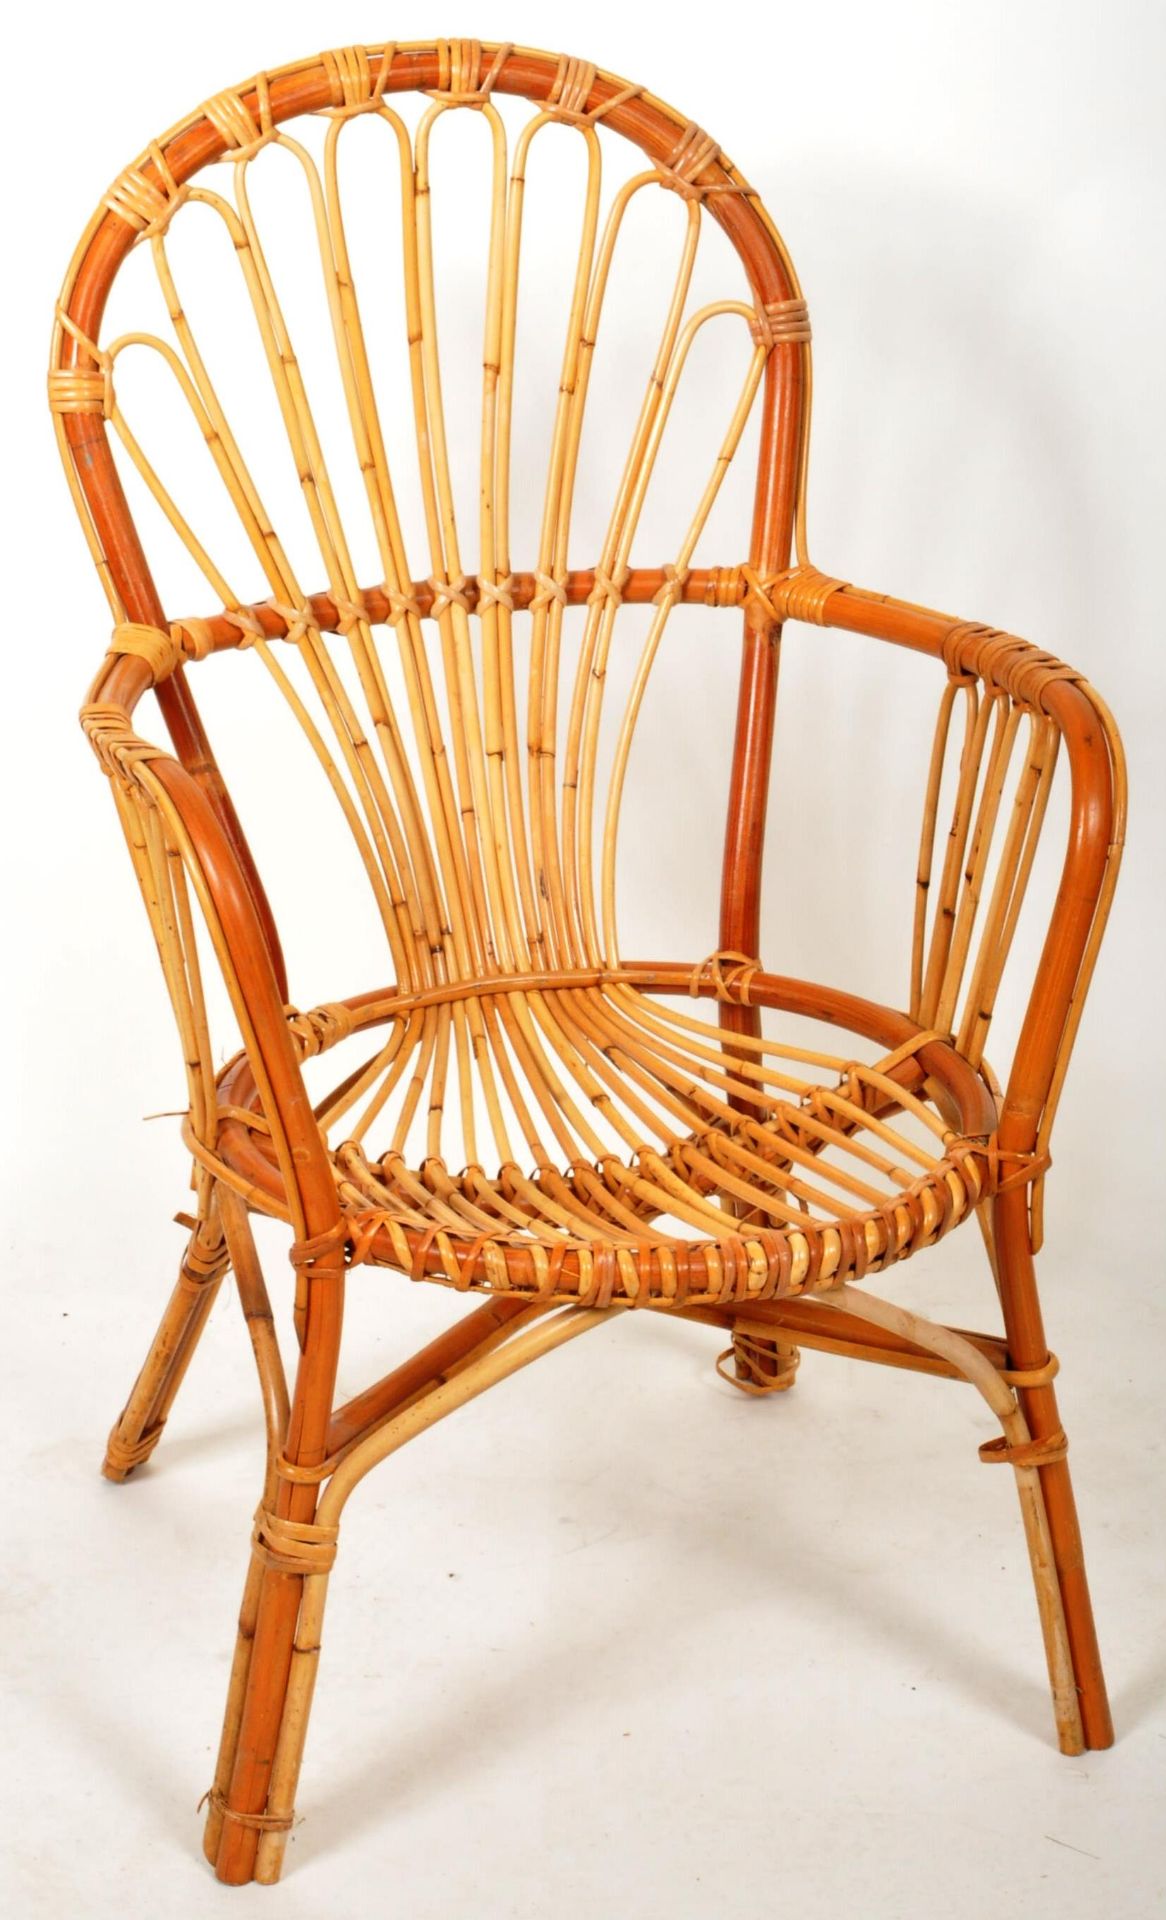 MID 20TH CENTURY ITALIAN BAMBOO AND WICKER / CANE ARMCHAIR - Image 2 of 5